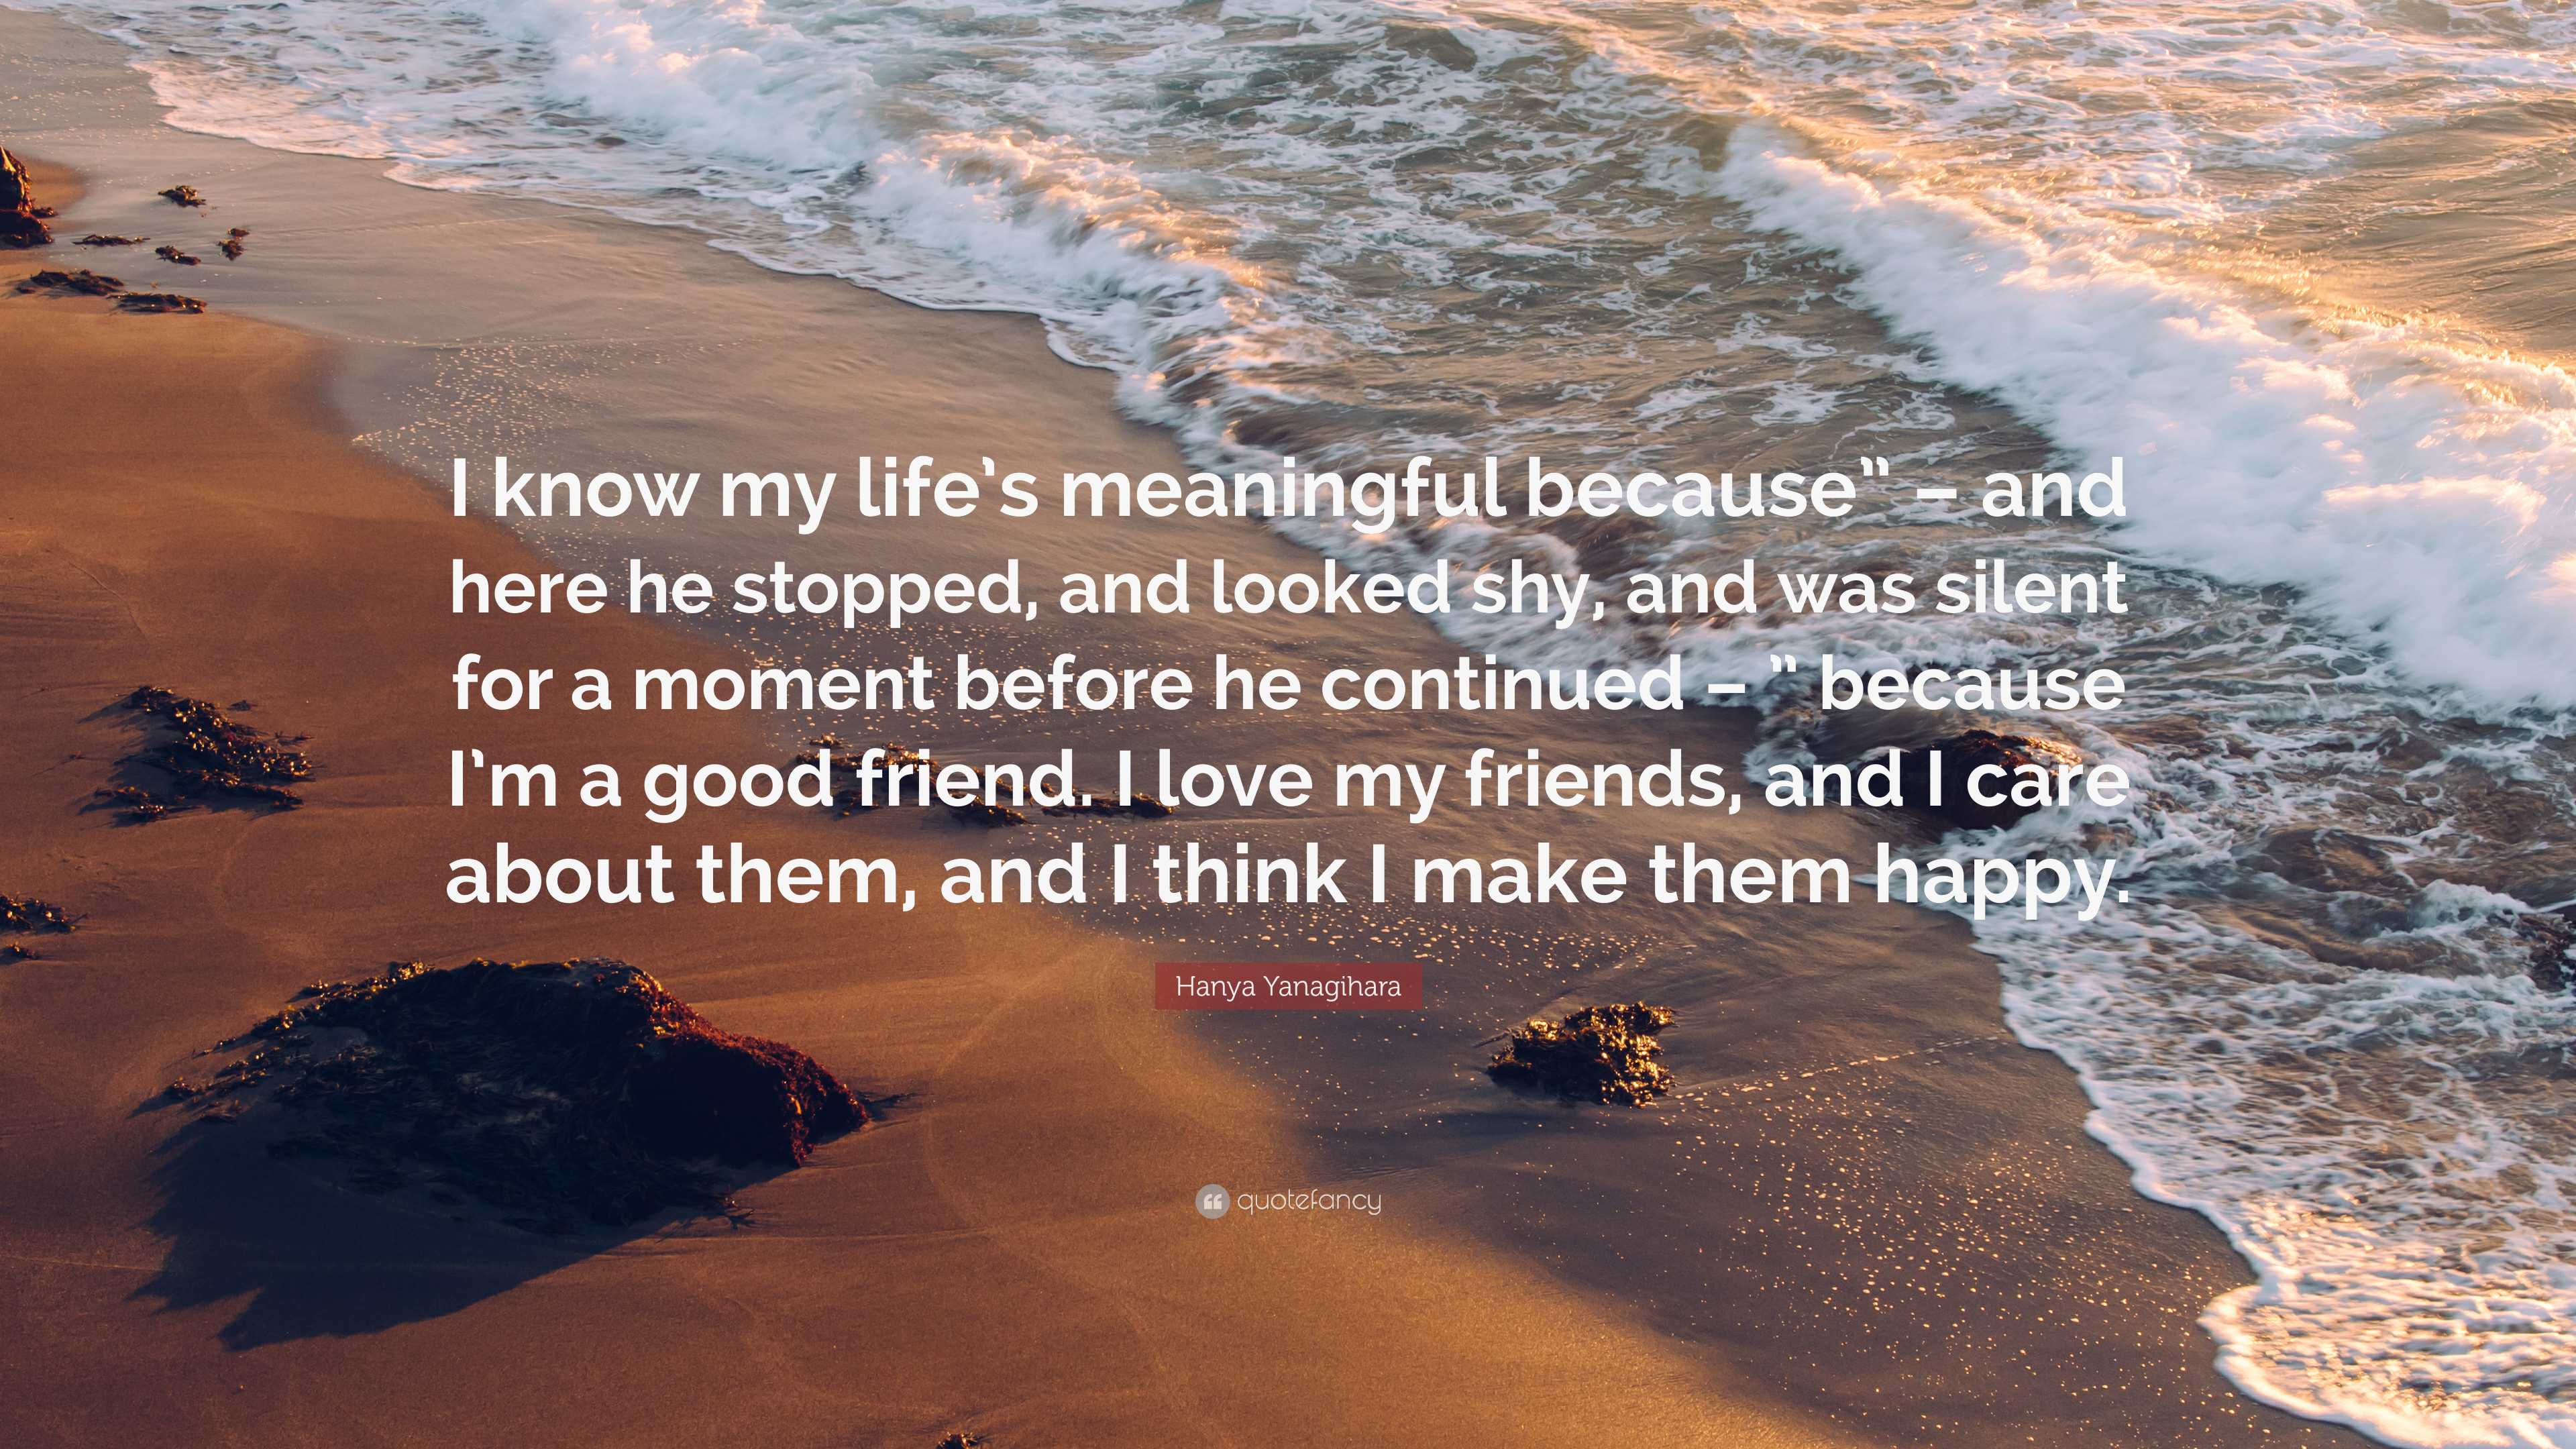 Hanya Yanagihara Quote: “I know my life’s meaningful because” – and ...